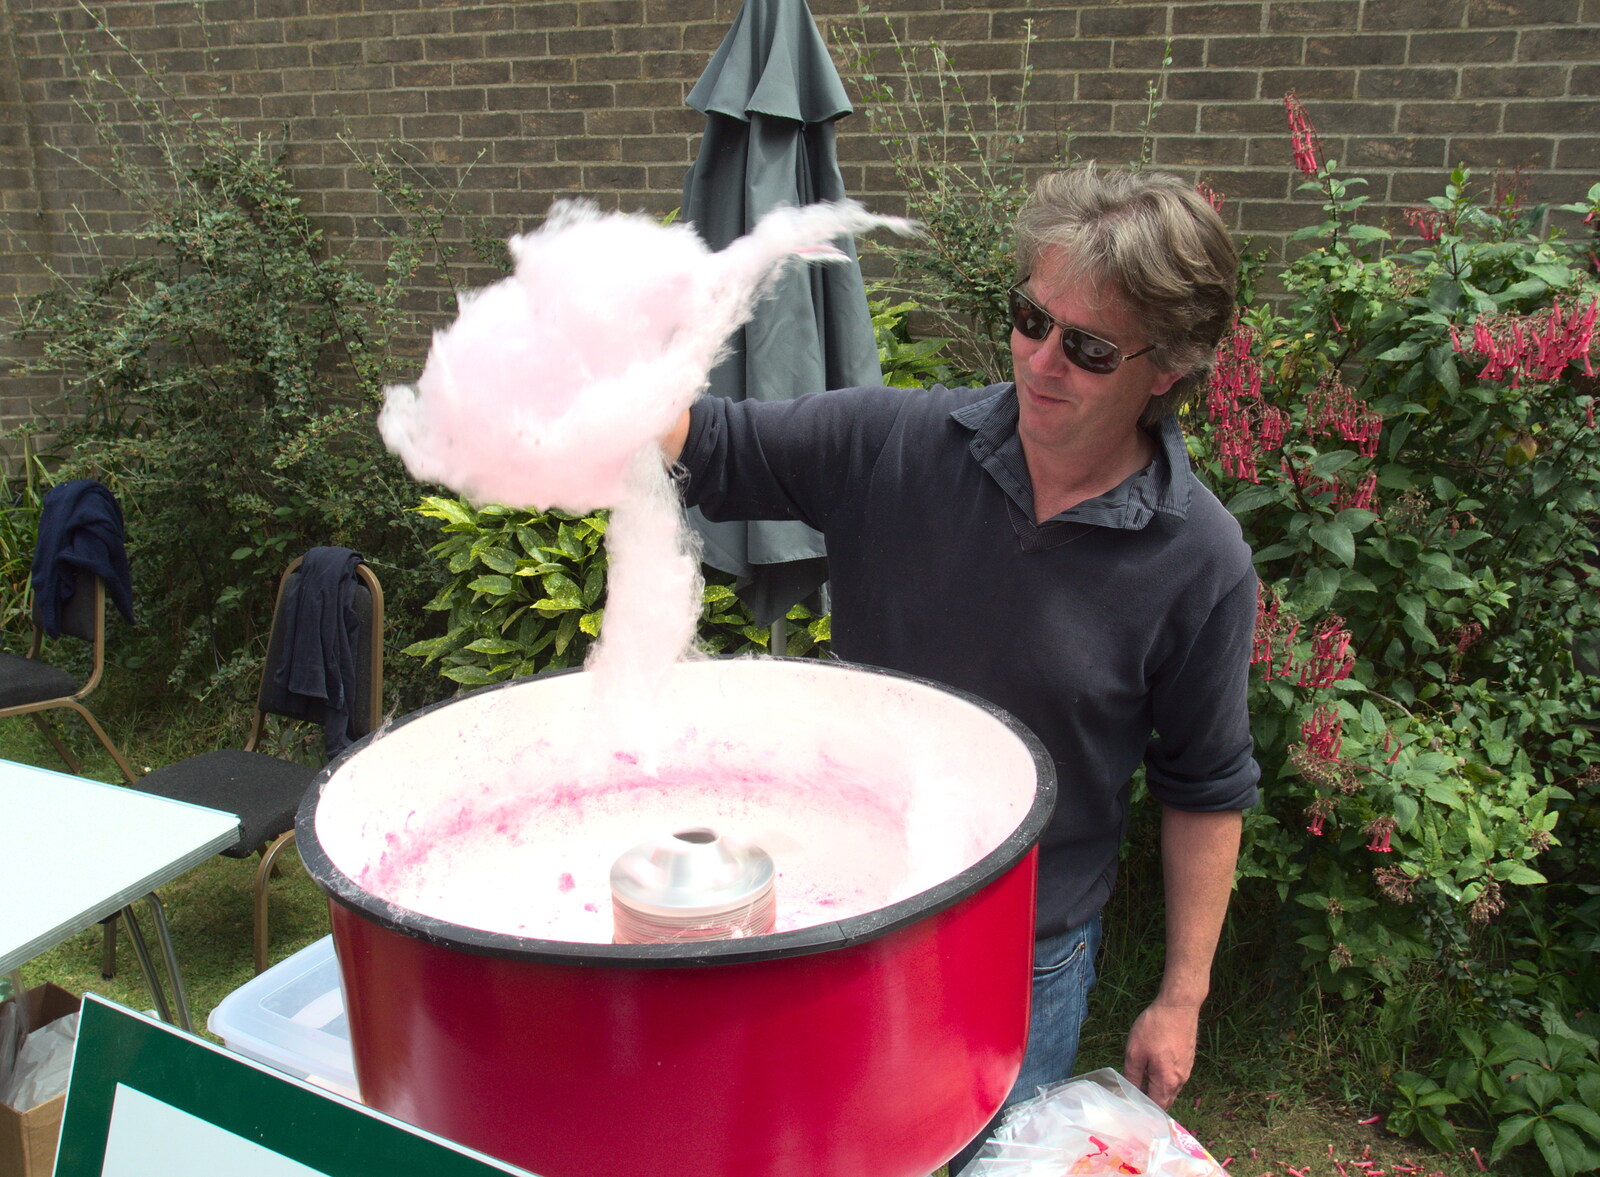 Candy Floss by the church hall from A Busy Day and a Church Fair, Diss, Norfolk - 28th June 2014